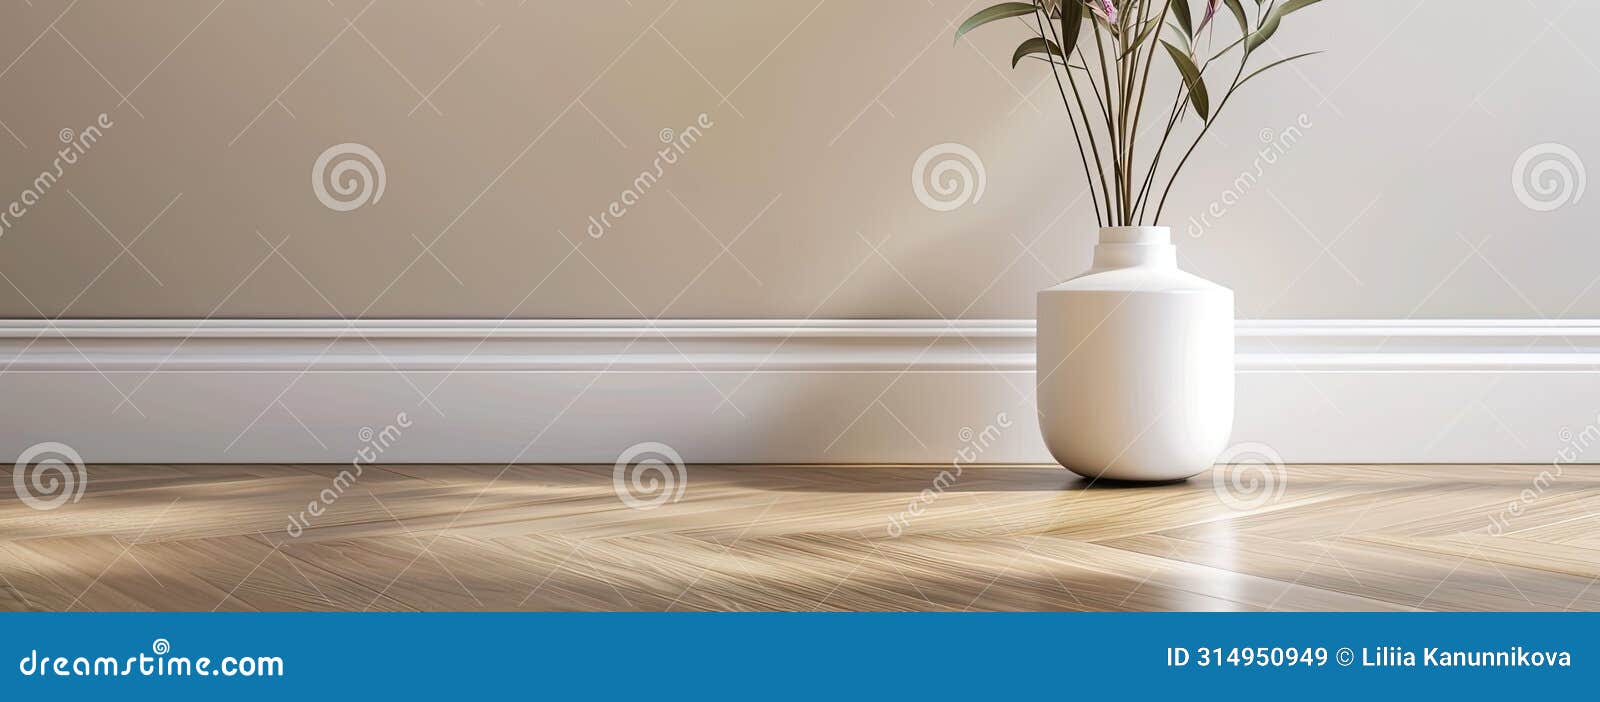 a baseboard color in crema or white, adding a touch of sophistication to interior .